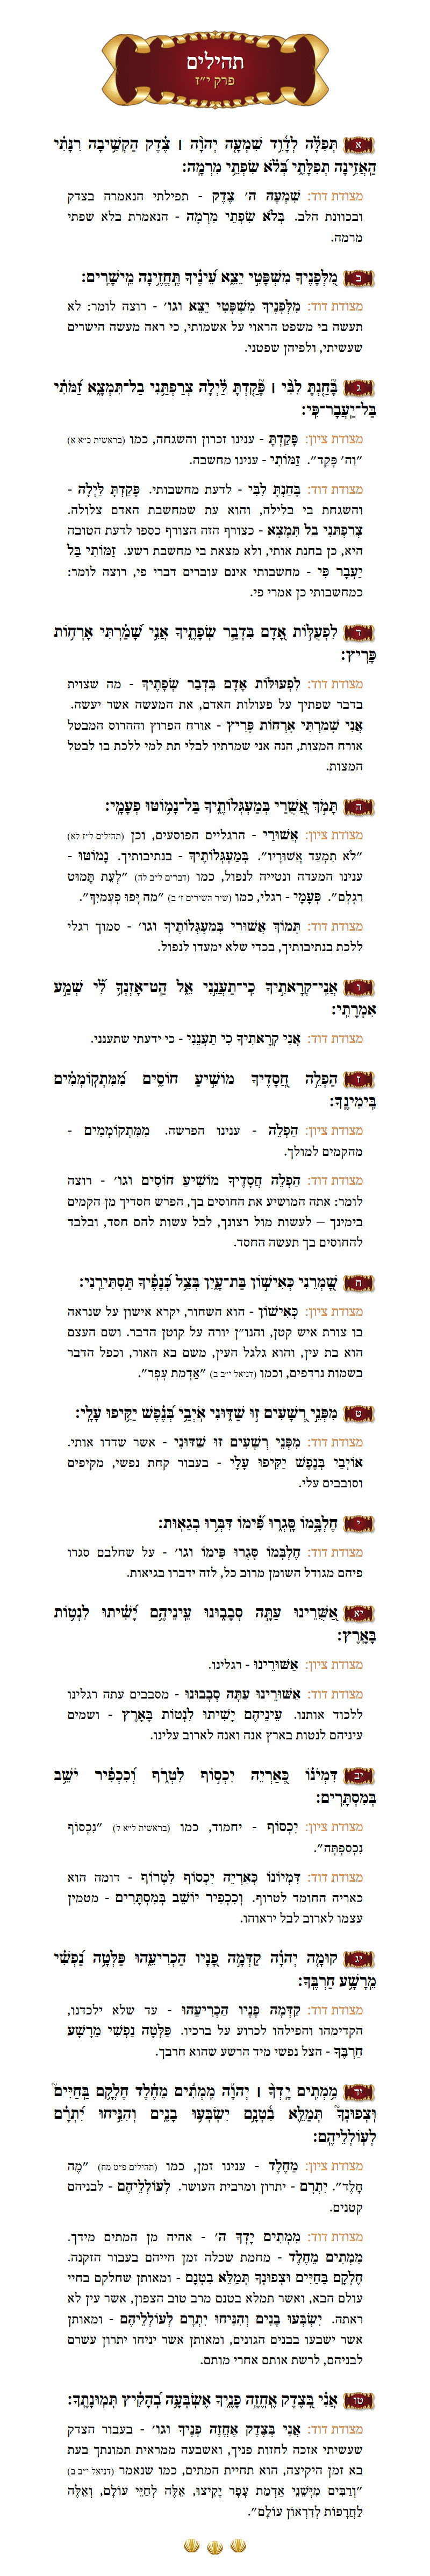 Sefer Tehillim Chapter 17 with commentary